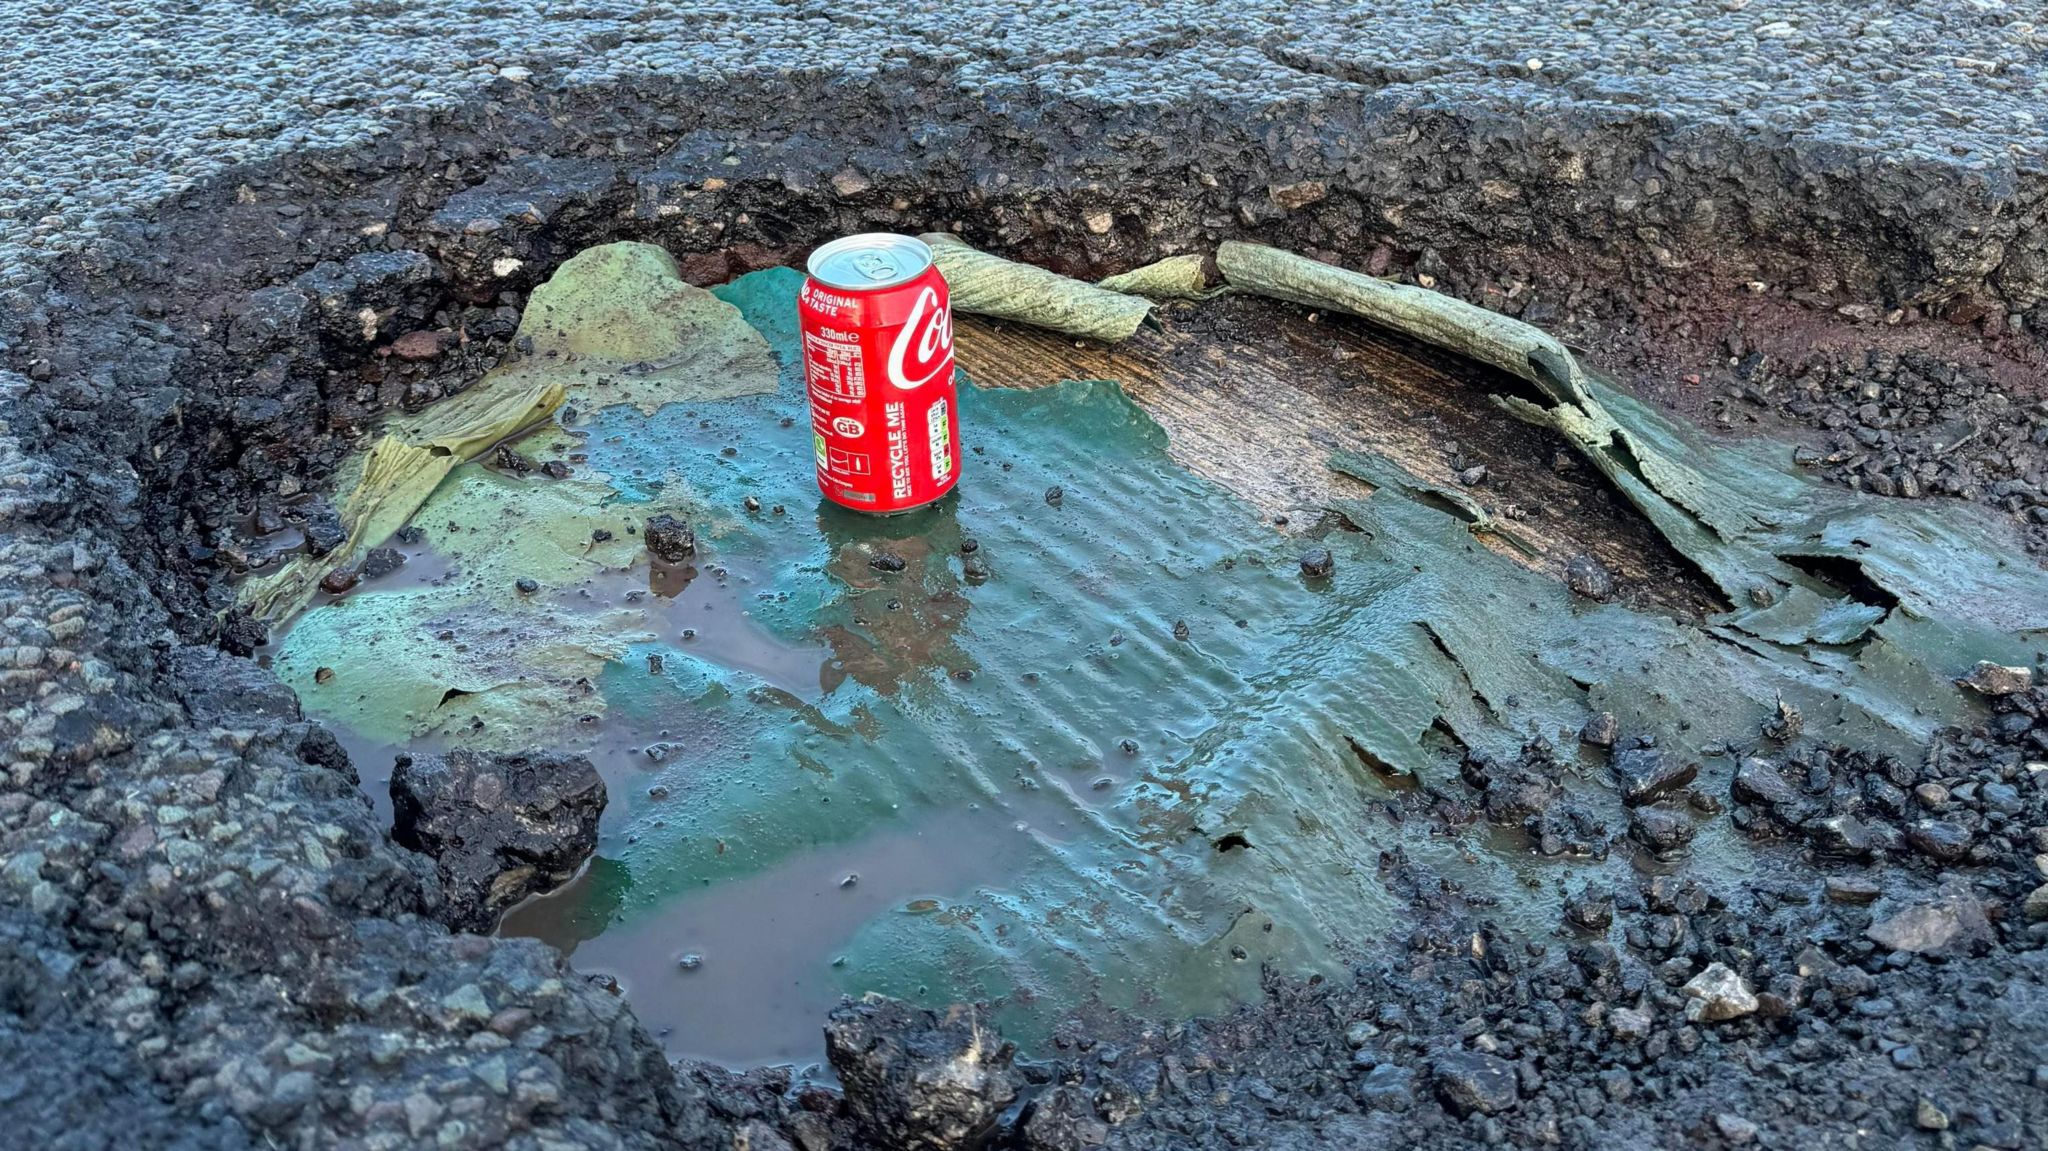 A Coke can is used to illustrate the depth of a pothole on the A64 in Leeds